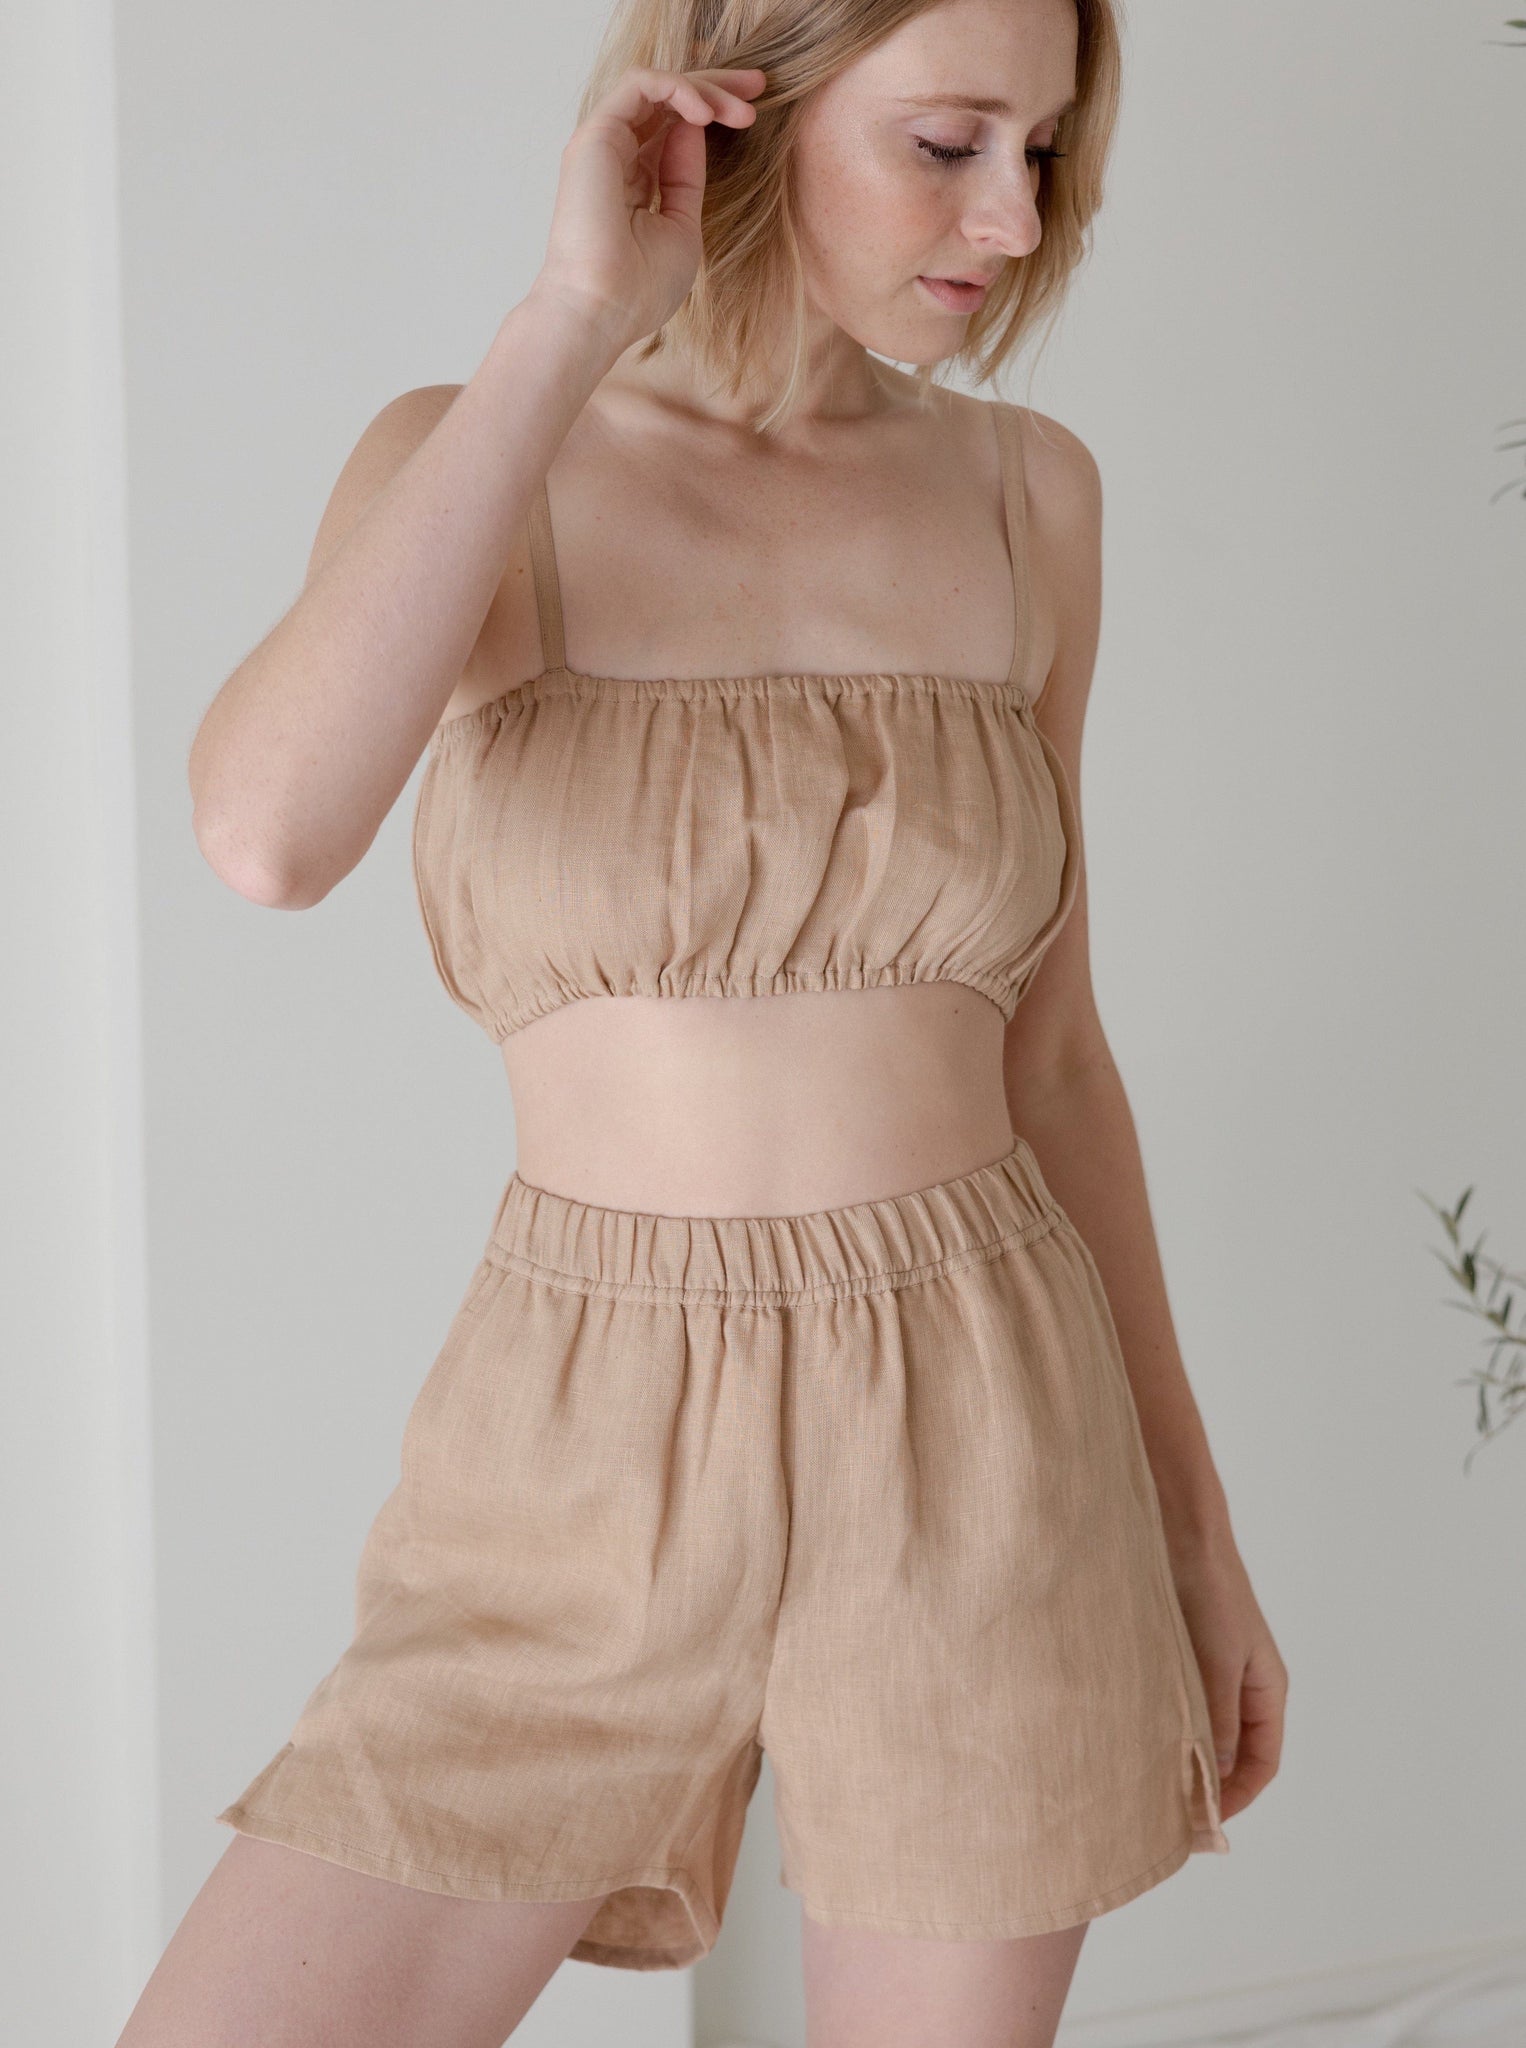 The model is wearing a Elastic Bandeau - Ginger - Sample.